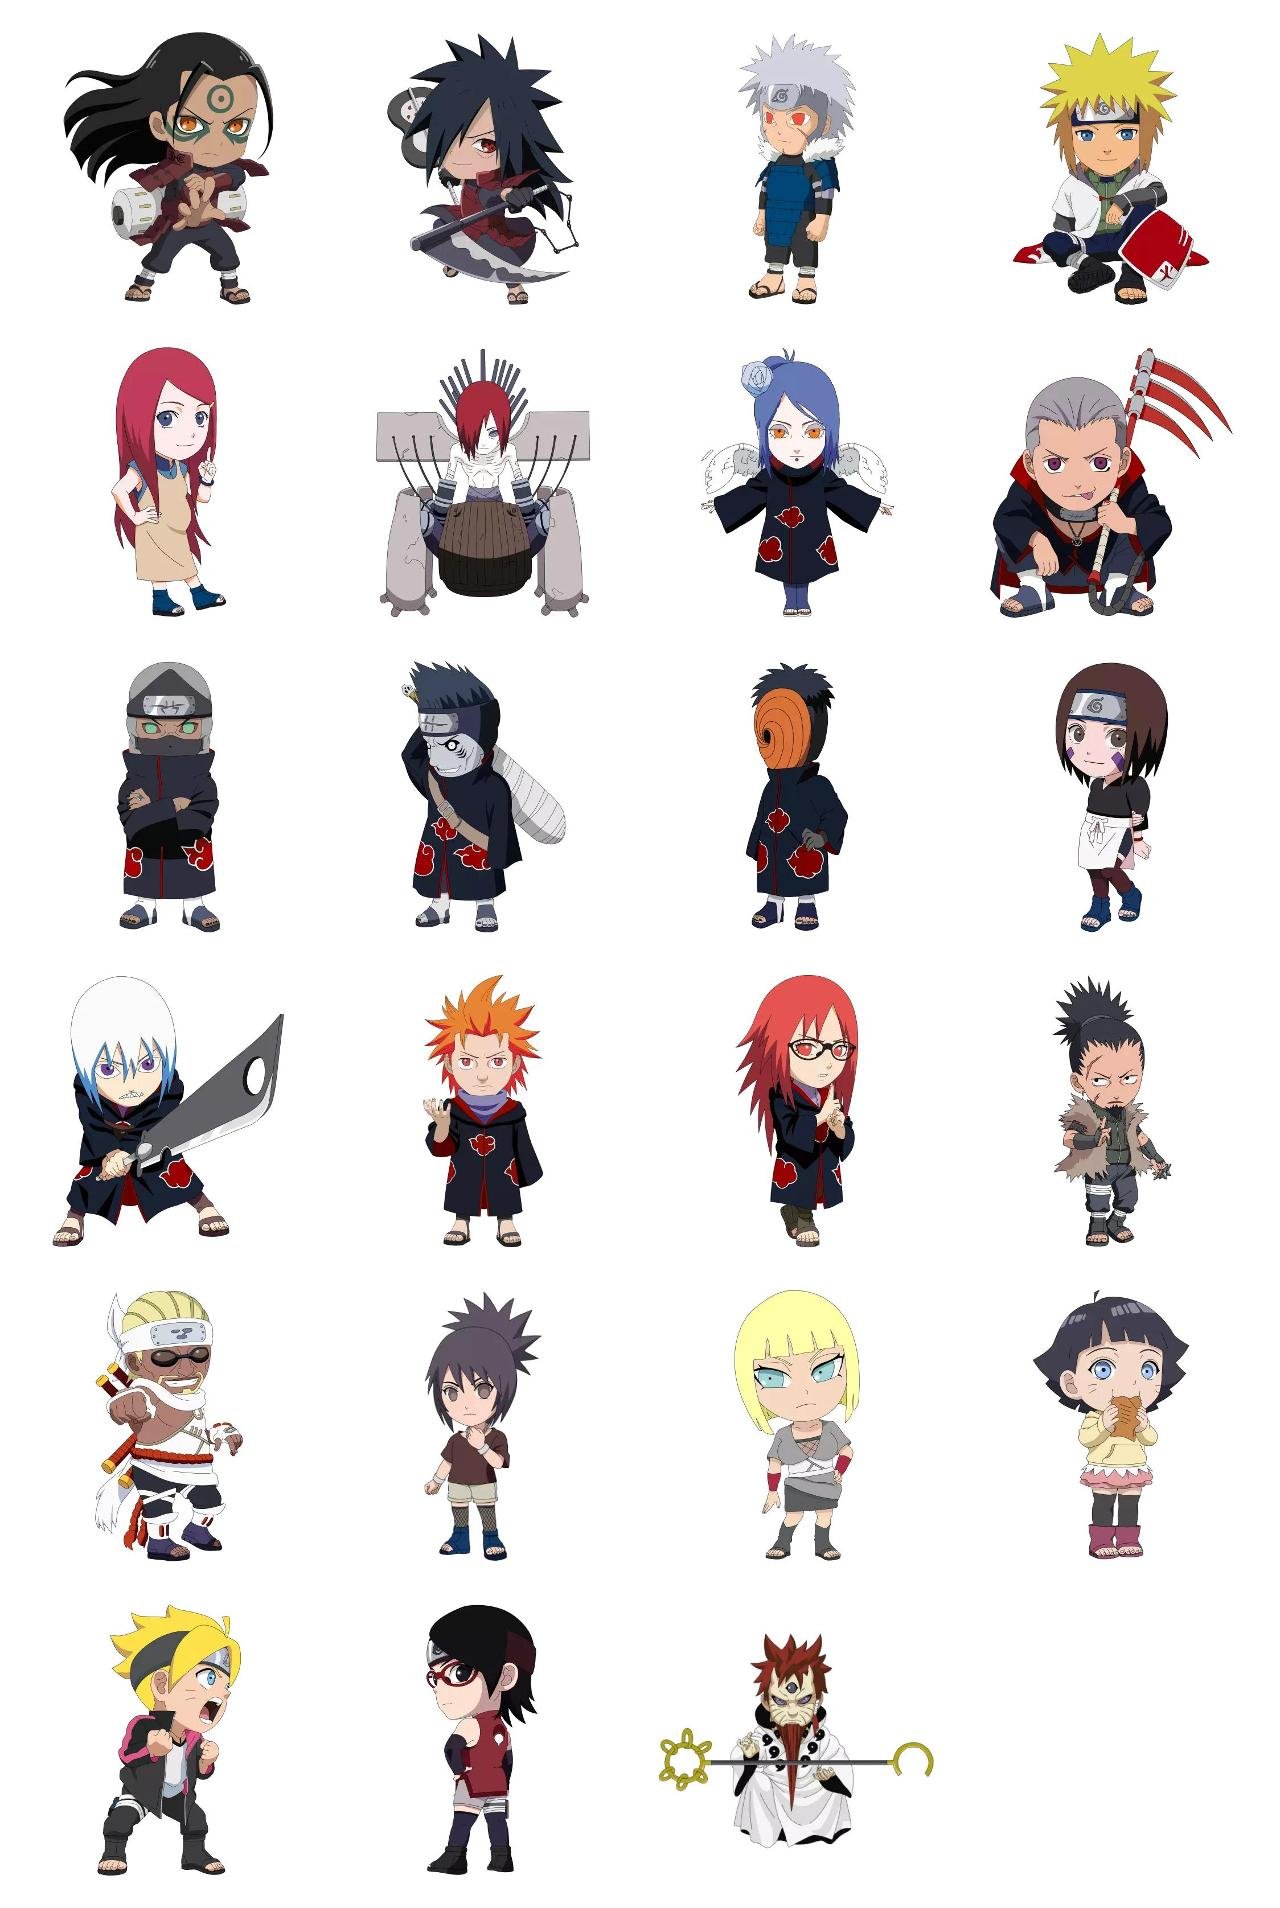 Naruto #32 Naruto sticker pack for Whatsapp, Telegram, Signal, and others chatting and message apps